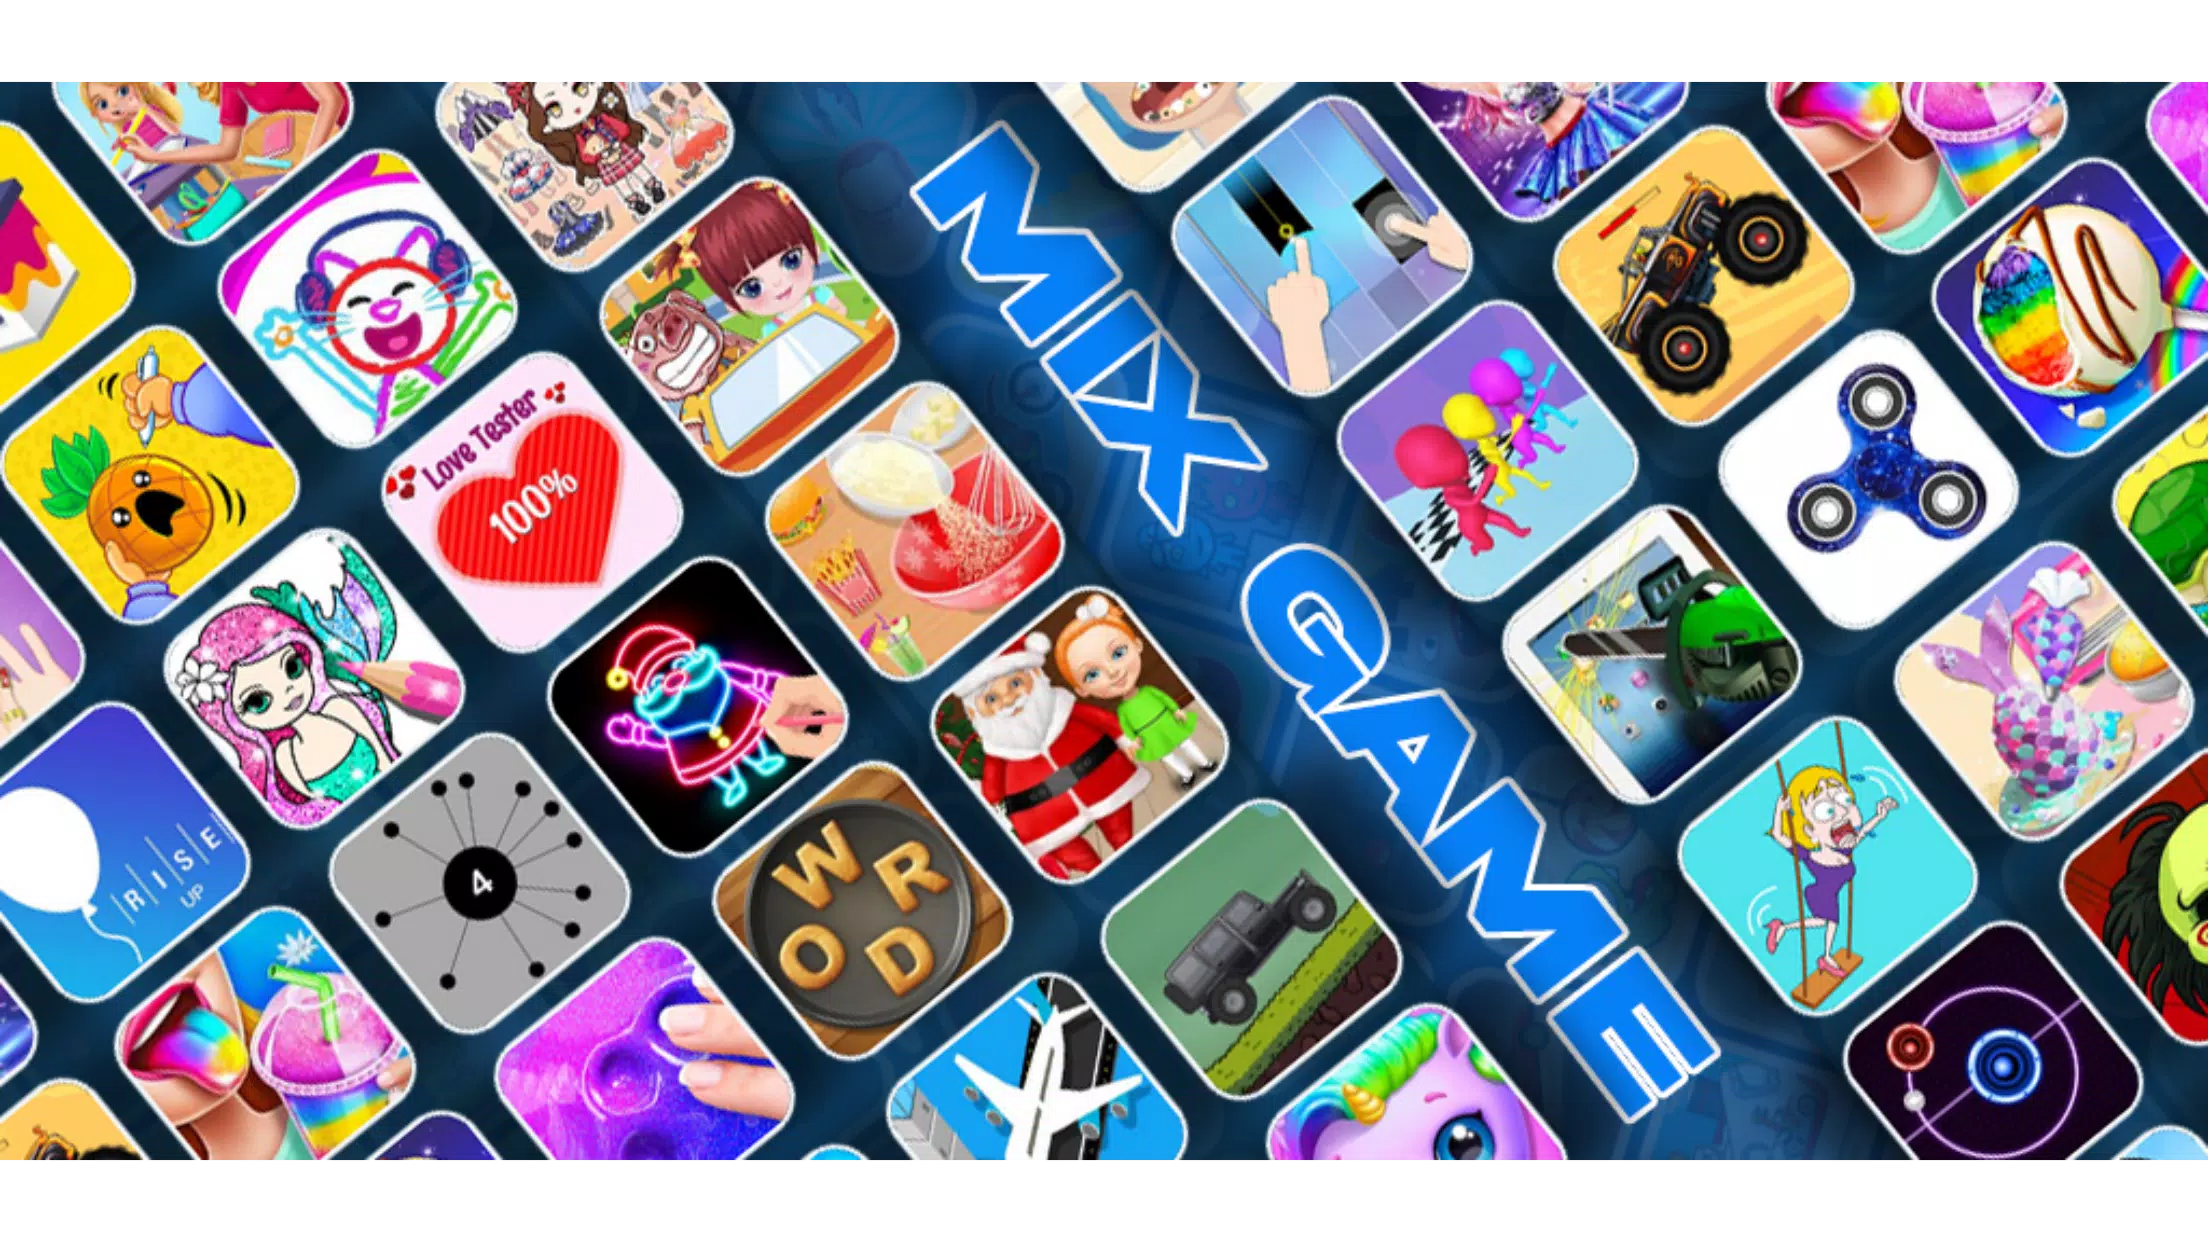 Download All Games: news game, mix game android on PC